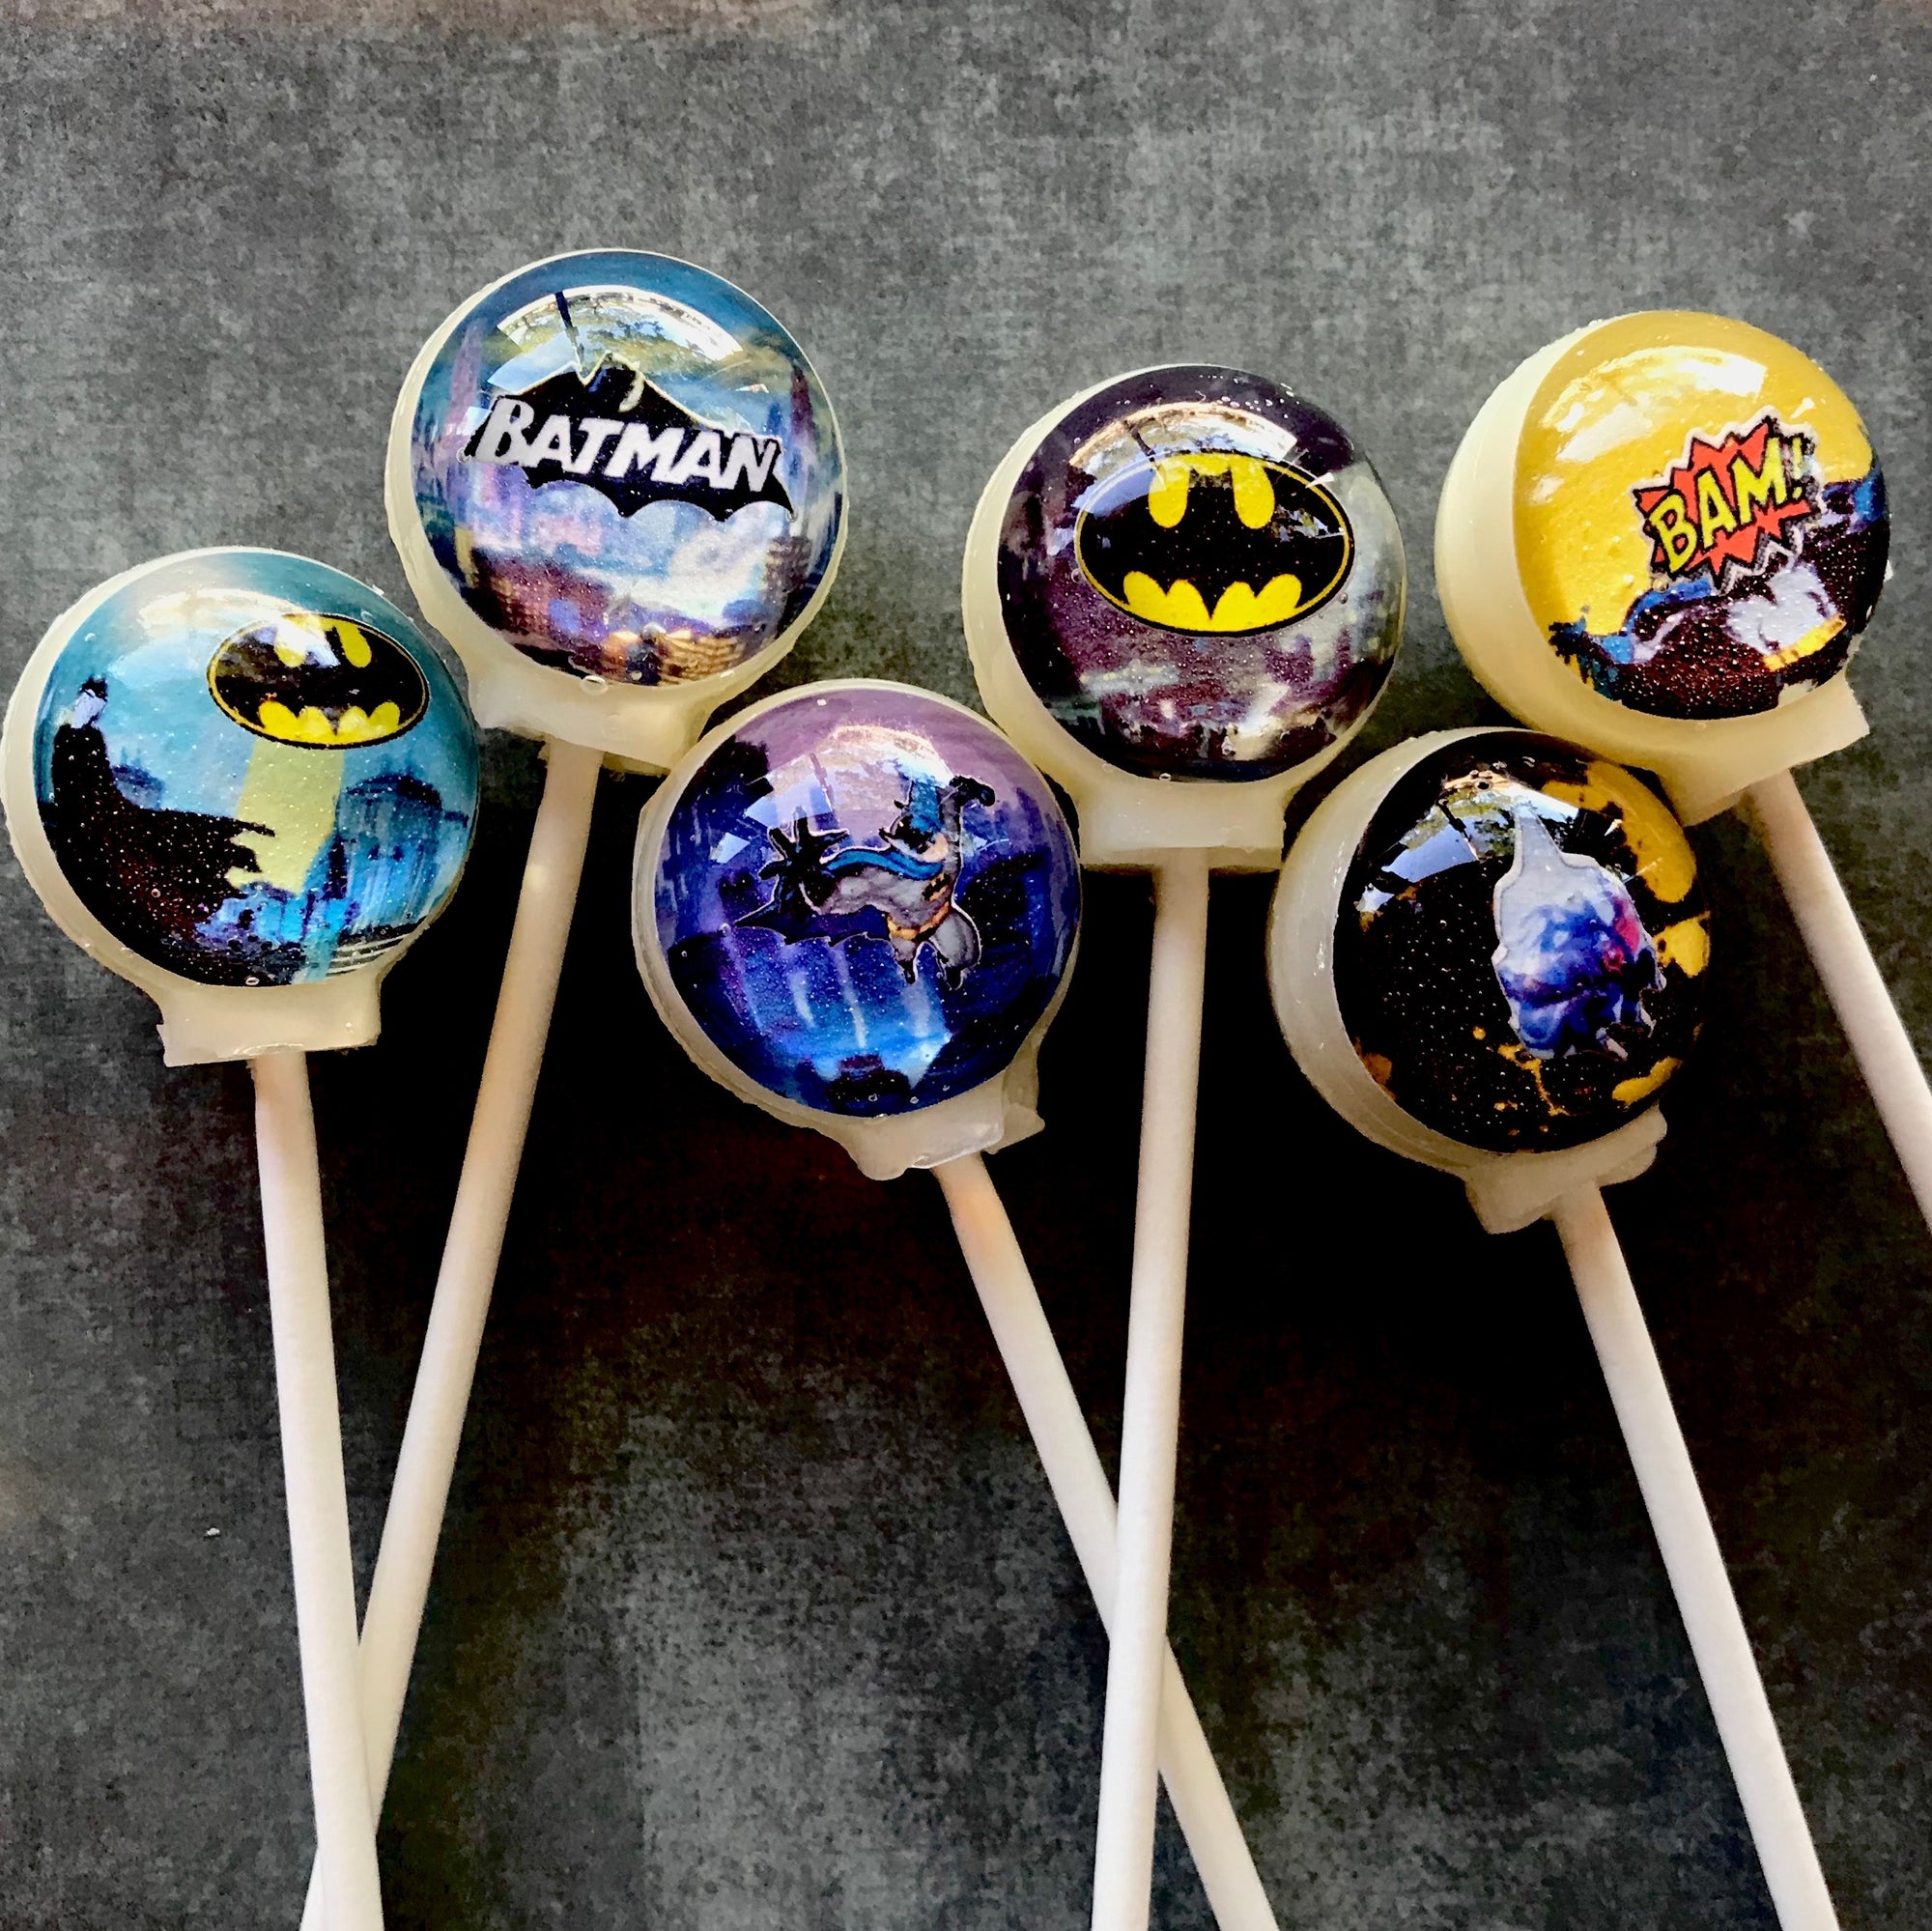 Caped Crusader Superhero 3-D Lollipops 6-piece set by I Want Candy!